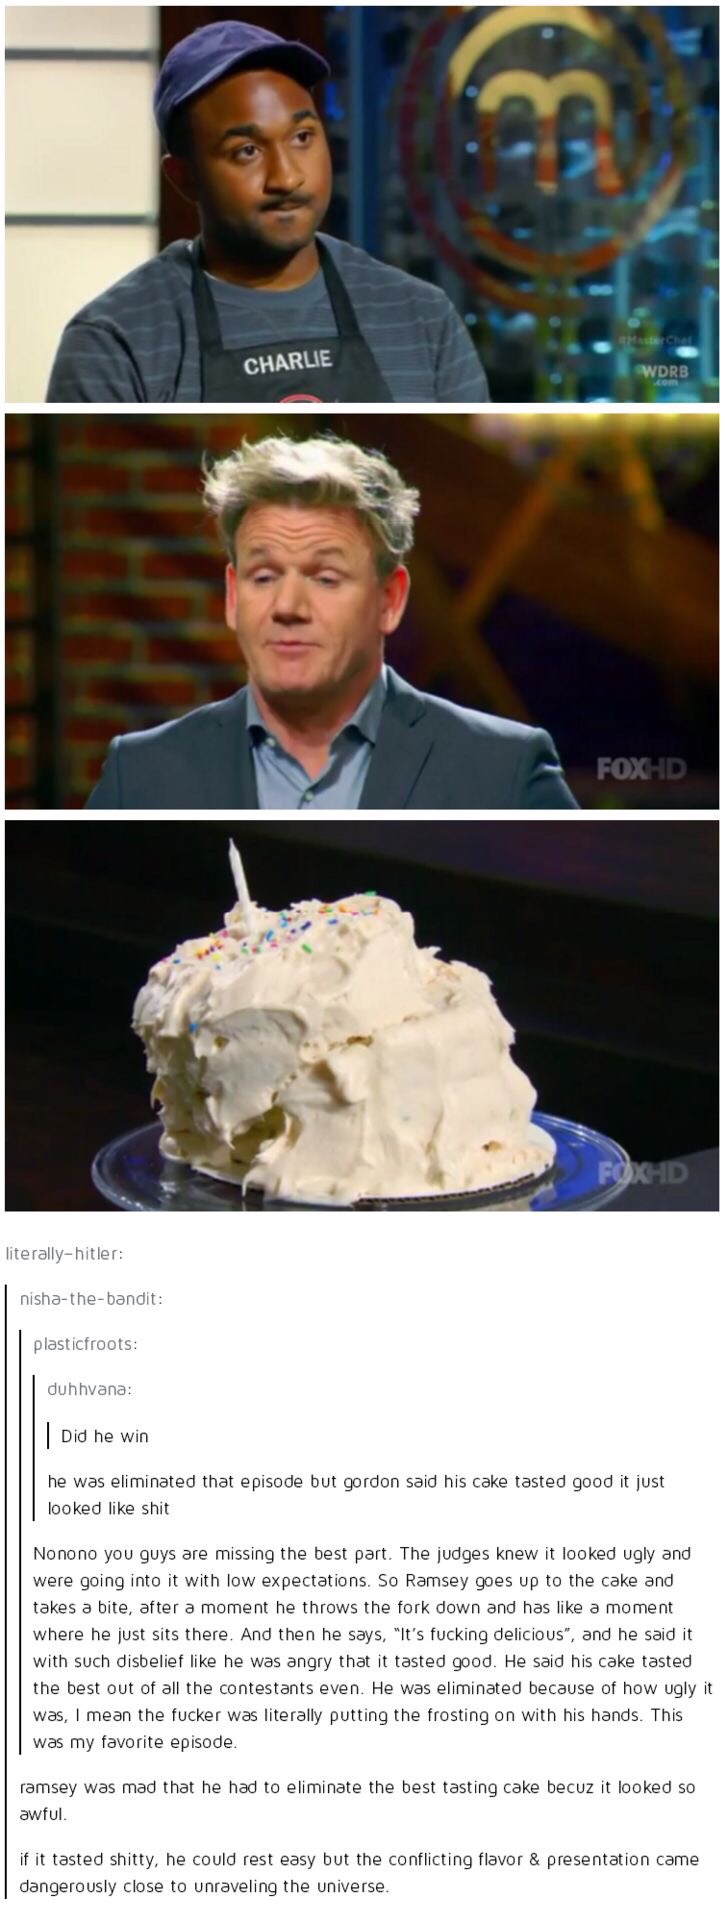 The cake was a lie.